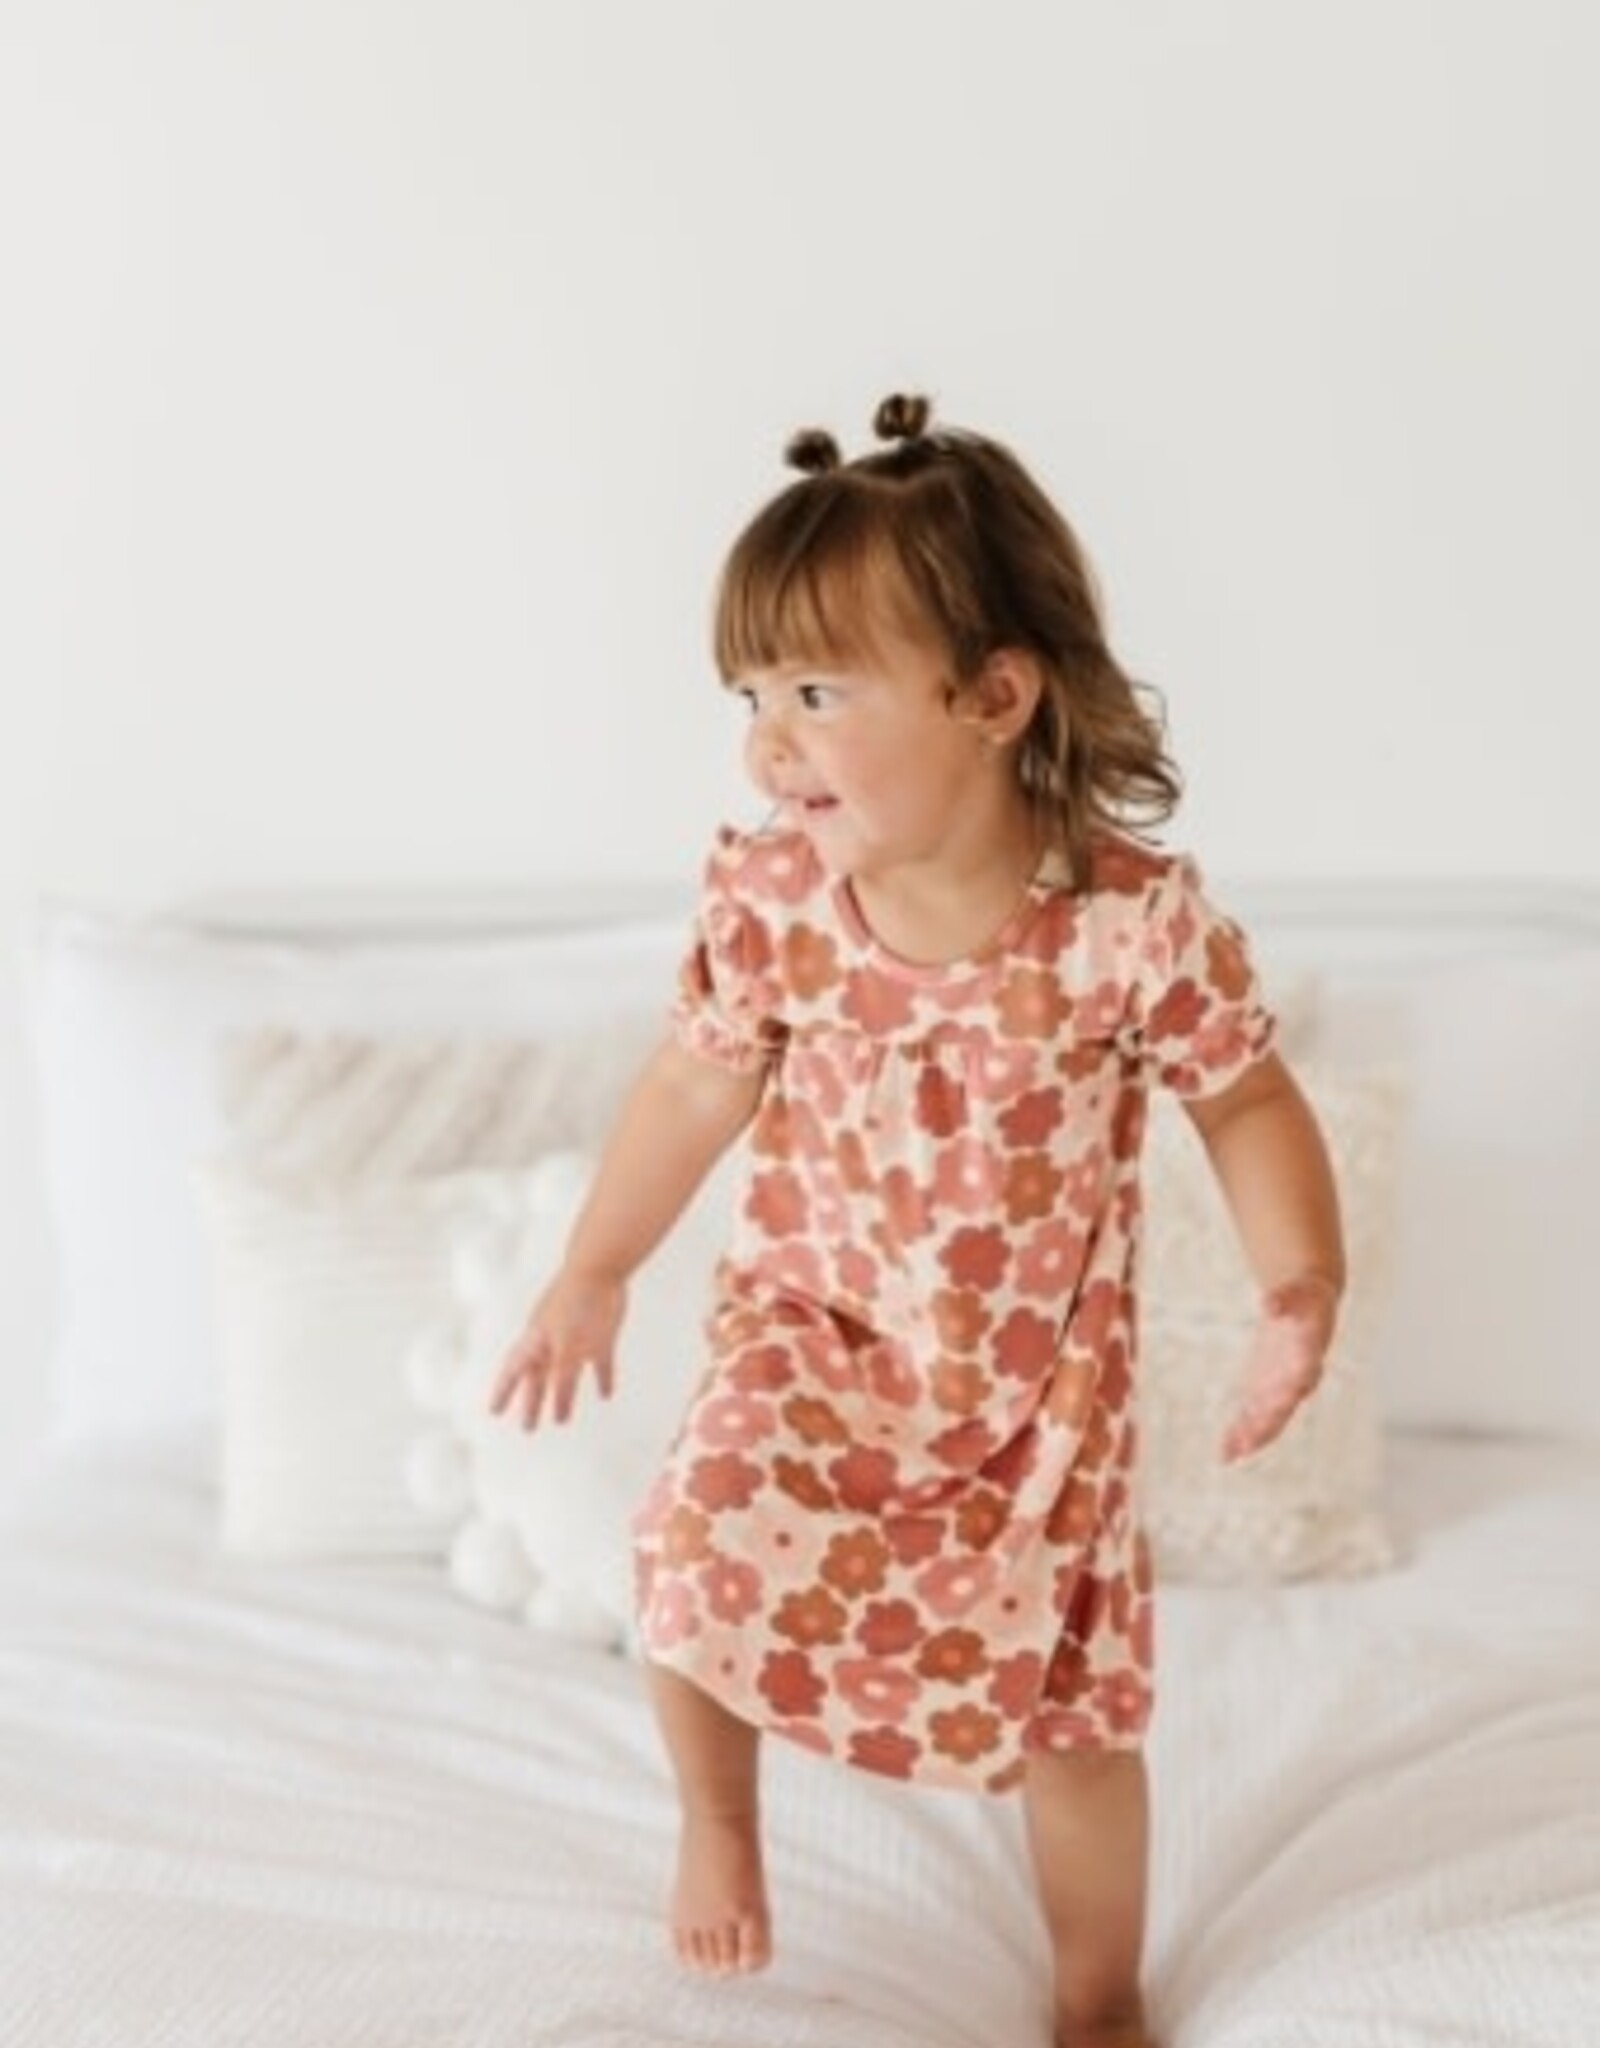 Babysprouts GIRL'S NIGHT GOWN